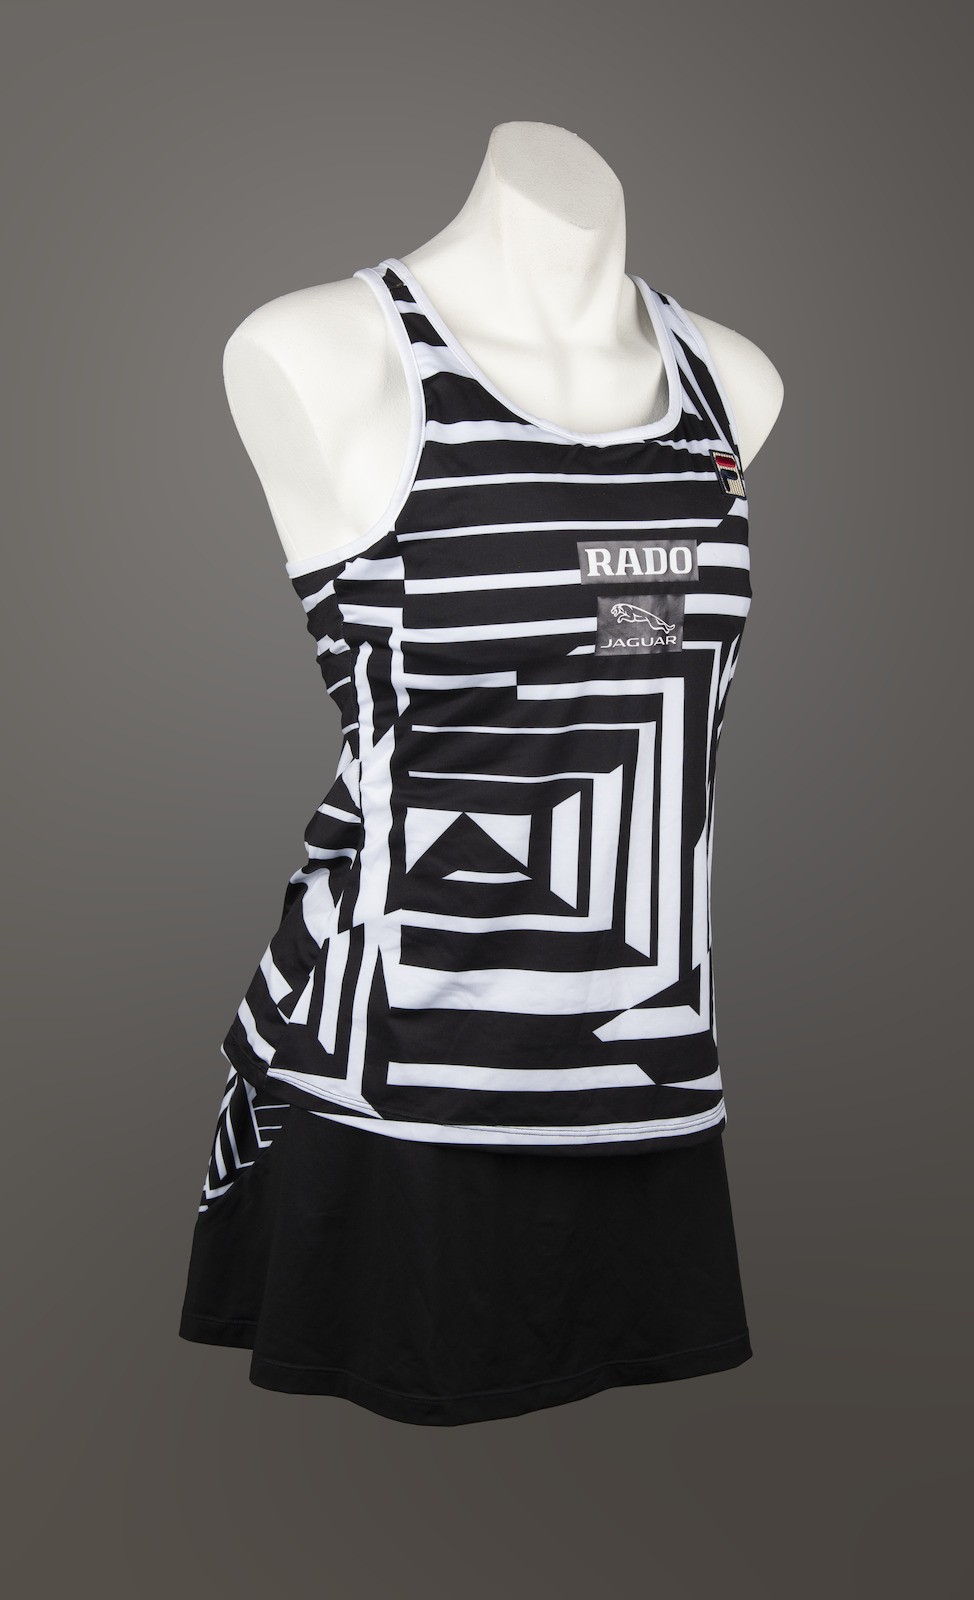 A black and white tennis outfit 